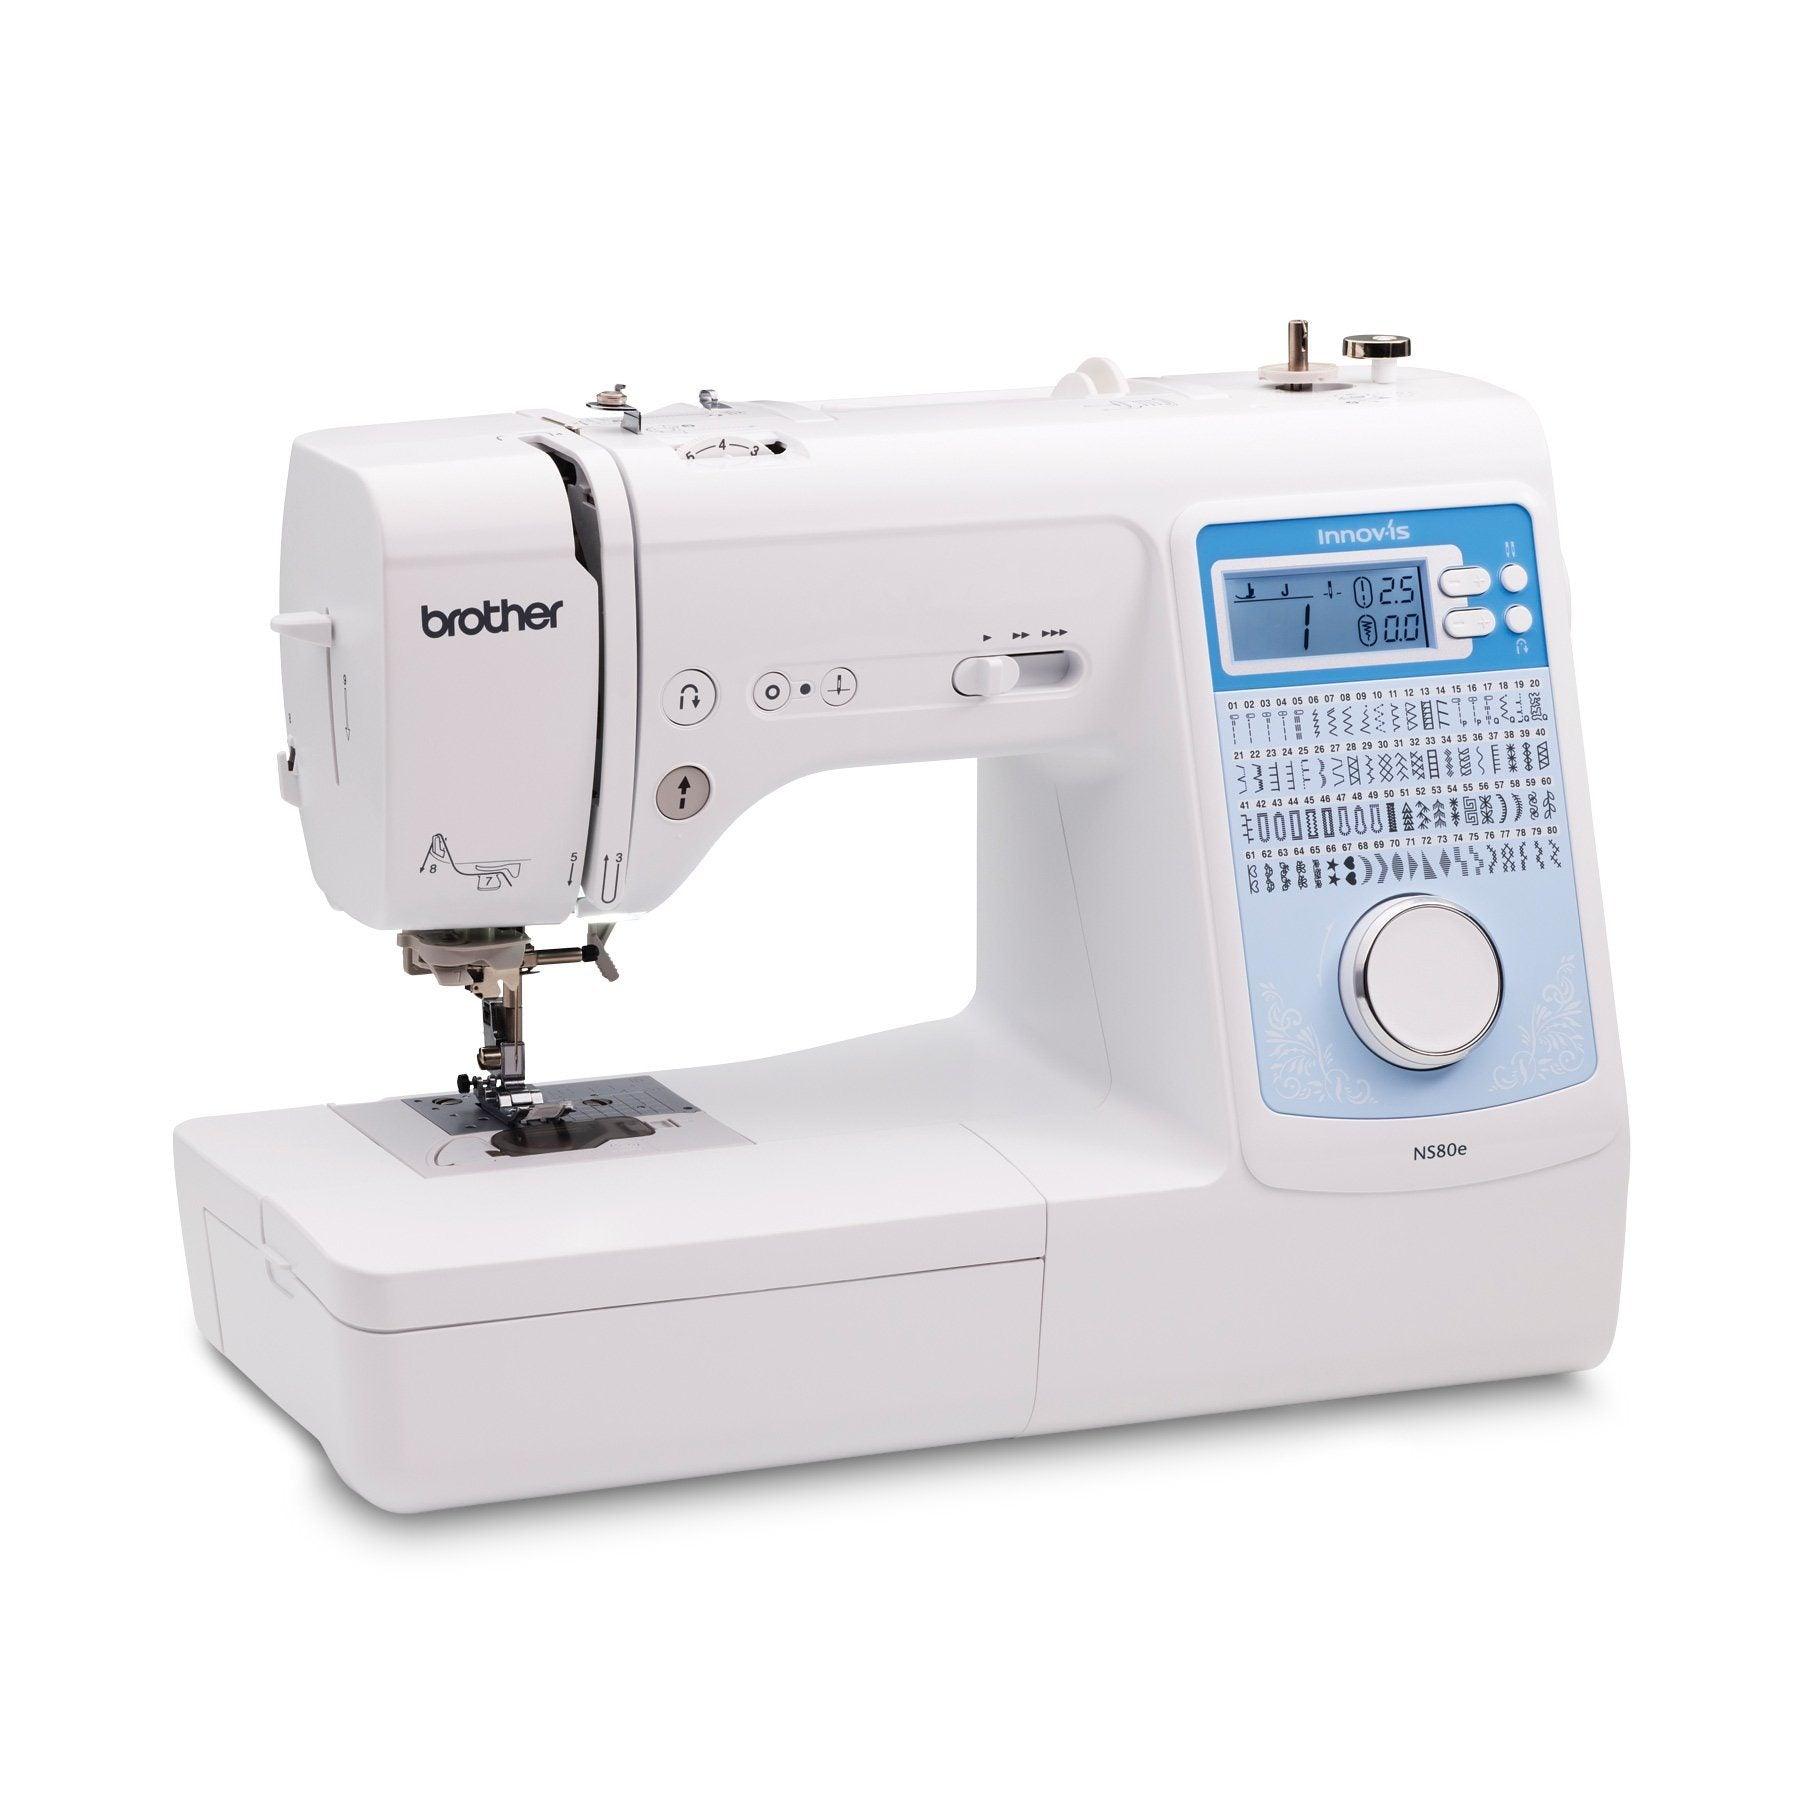 Brother NS80E Design Star 2 - Kawartha Quilting and Sewing LTD.